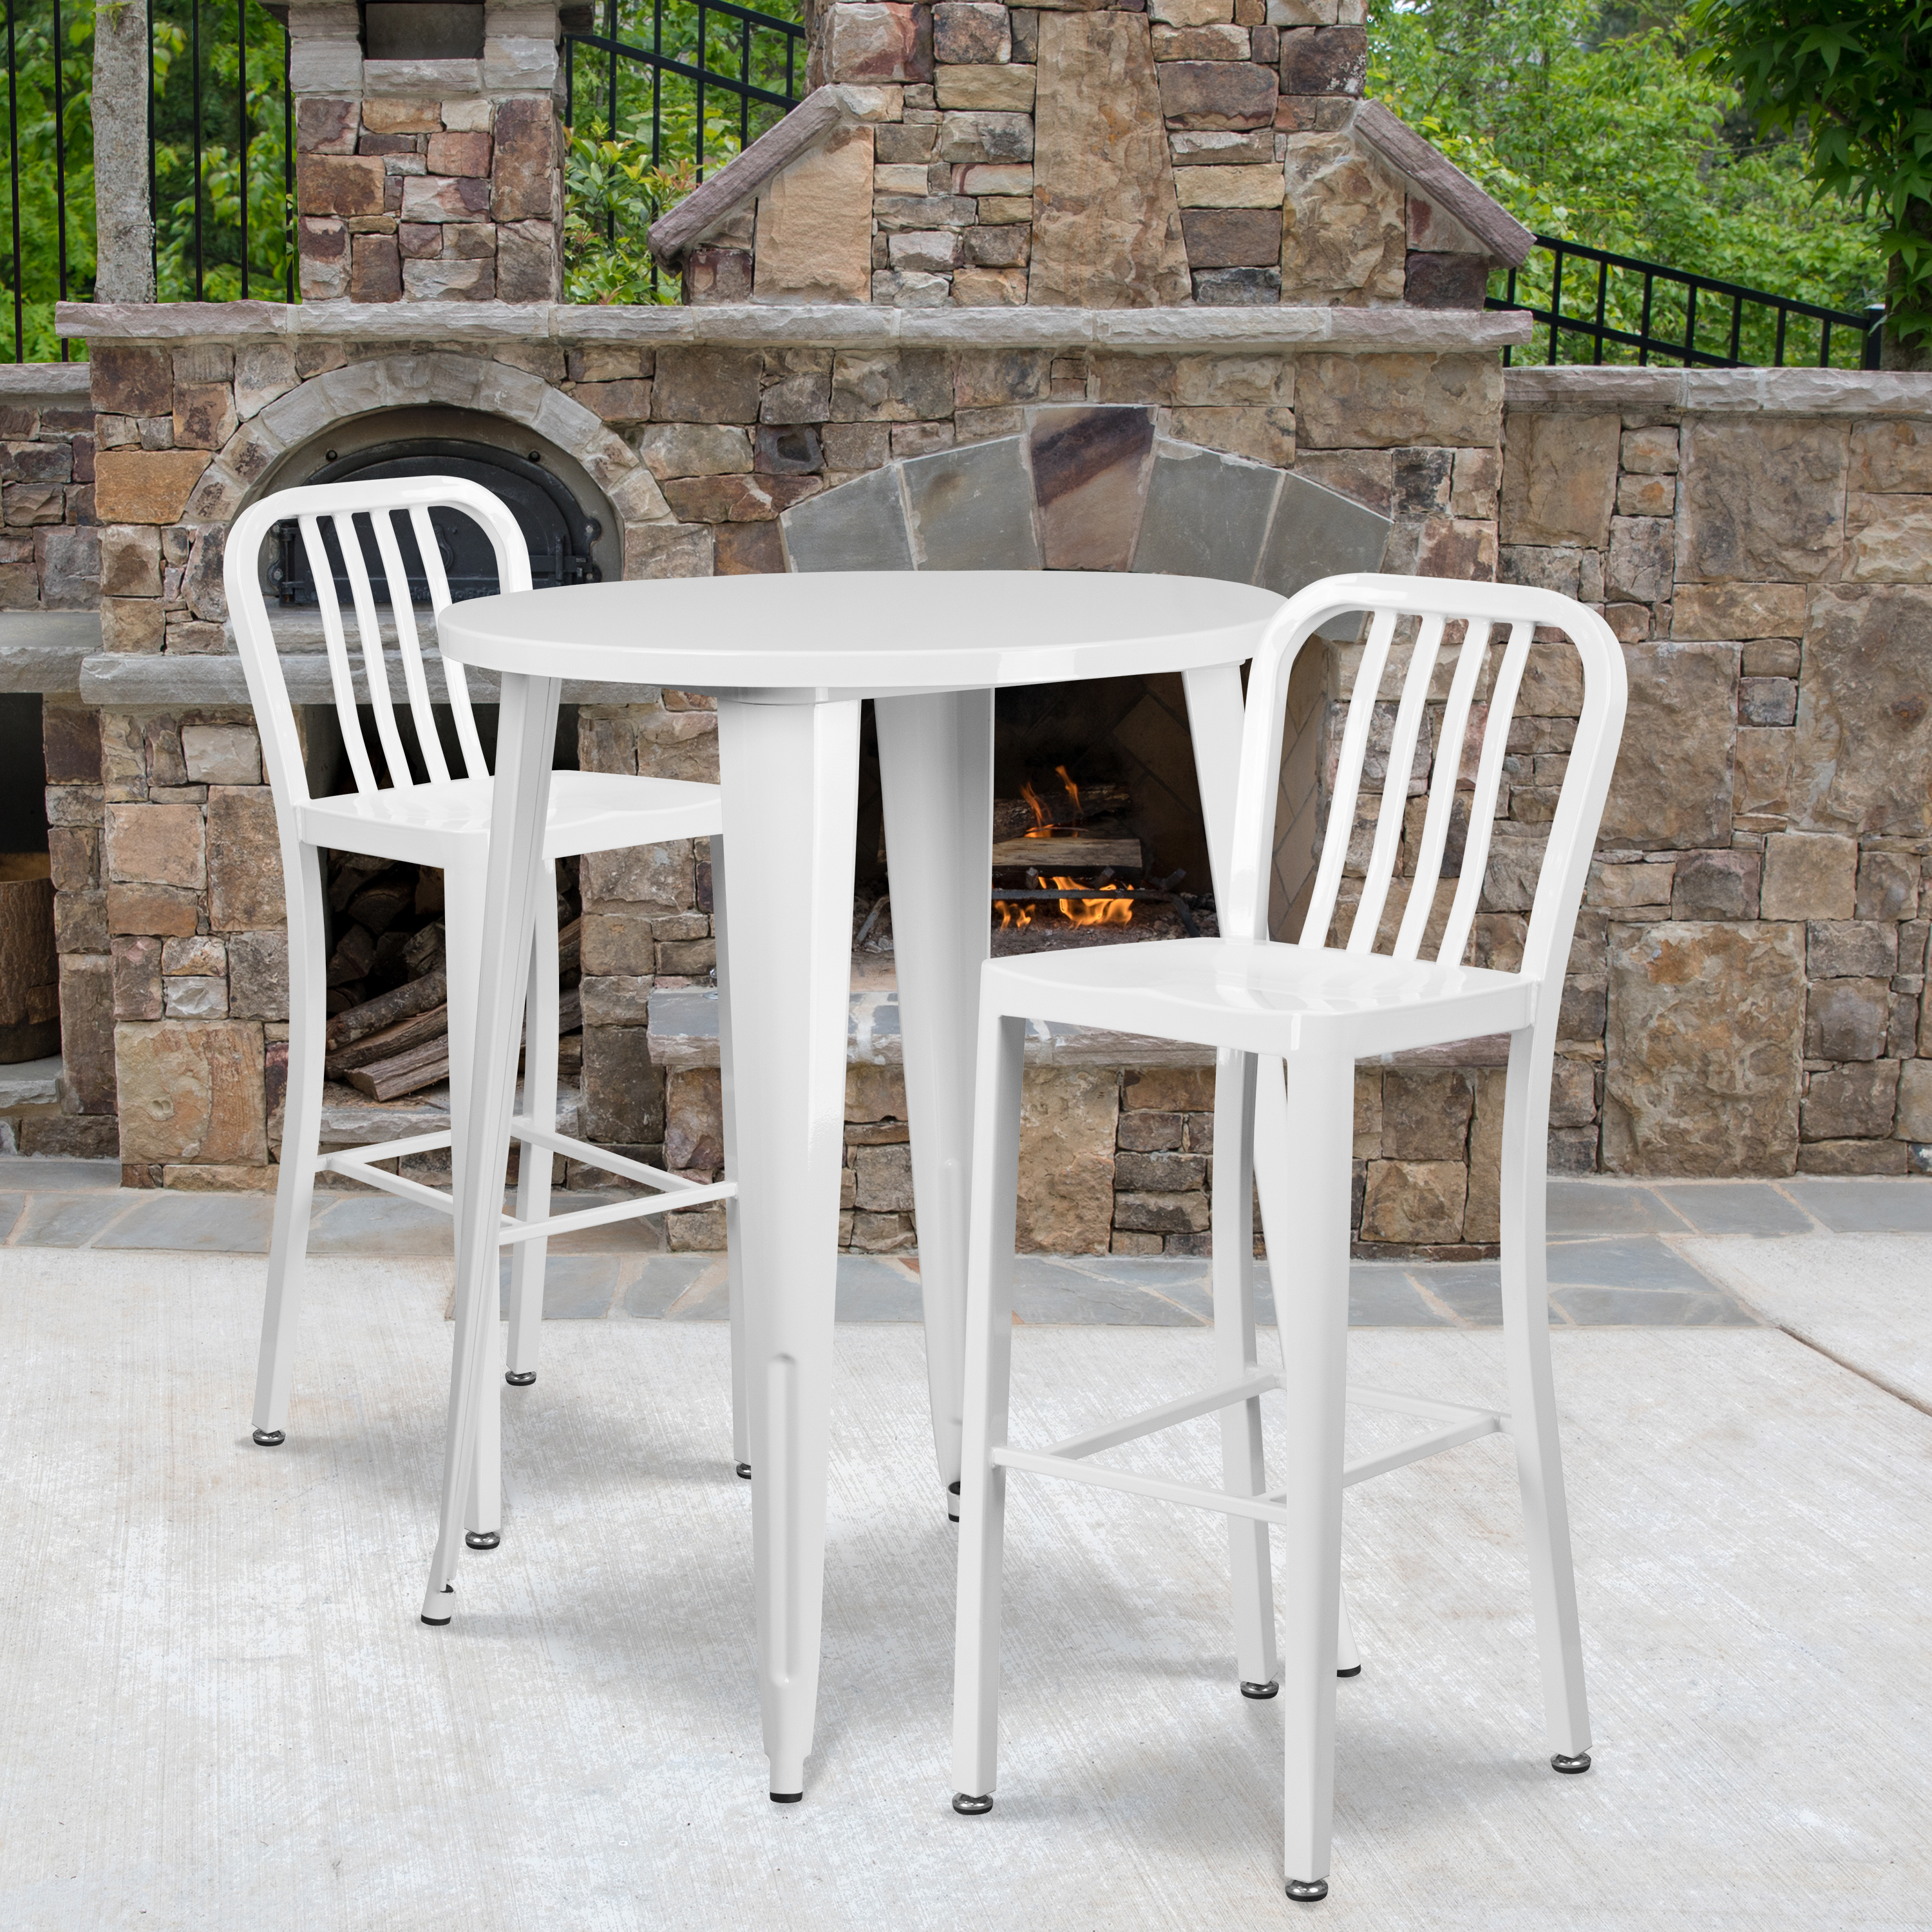 Flash Furniture Brad Commercial Grade 30" Round White Metal Indoor-Outdoor Bar Table Set with 2 Vertical Slat Back Stools - image 2 of 5